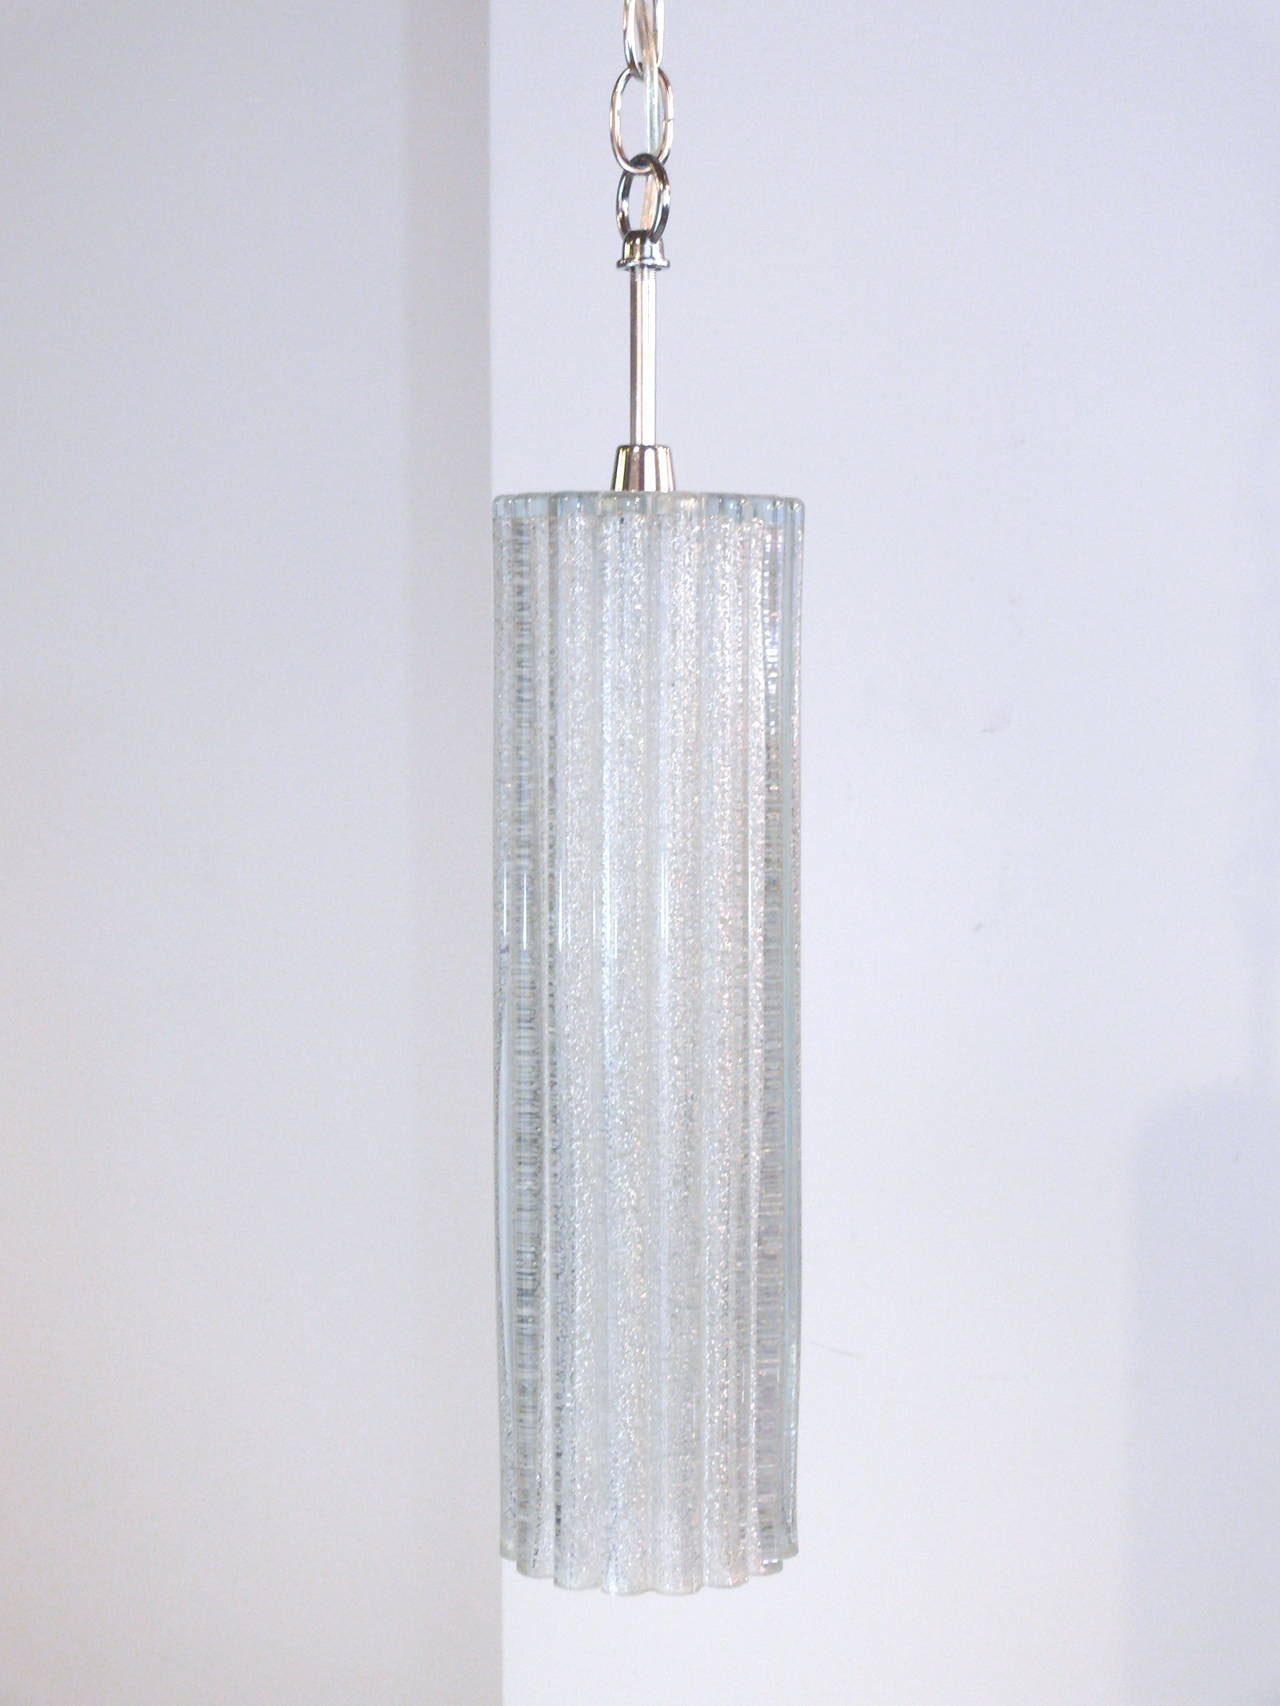 Elegant pair of pendant lights with a sparkly frosted 15